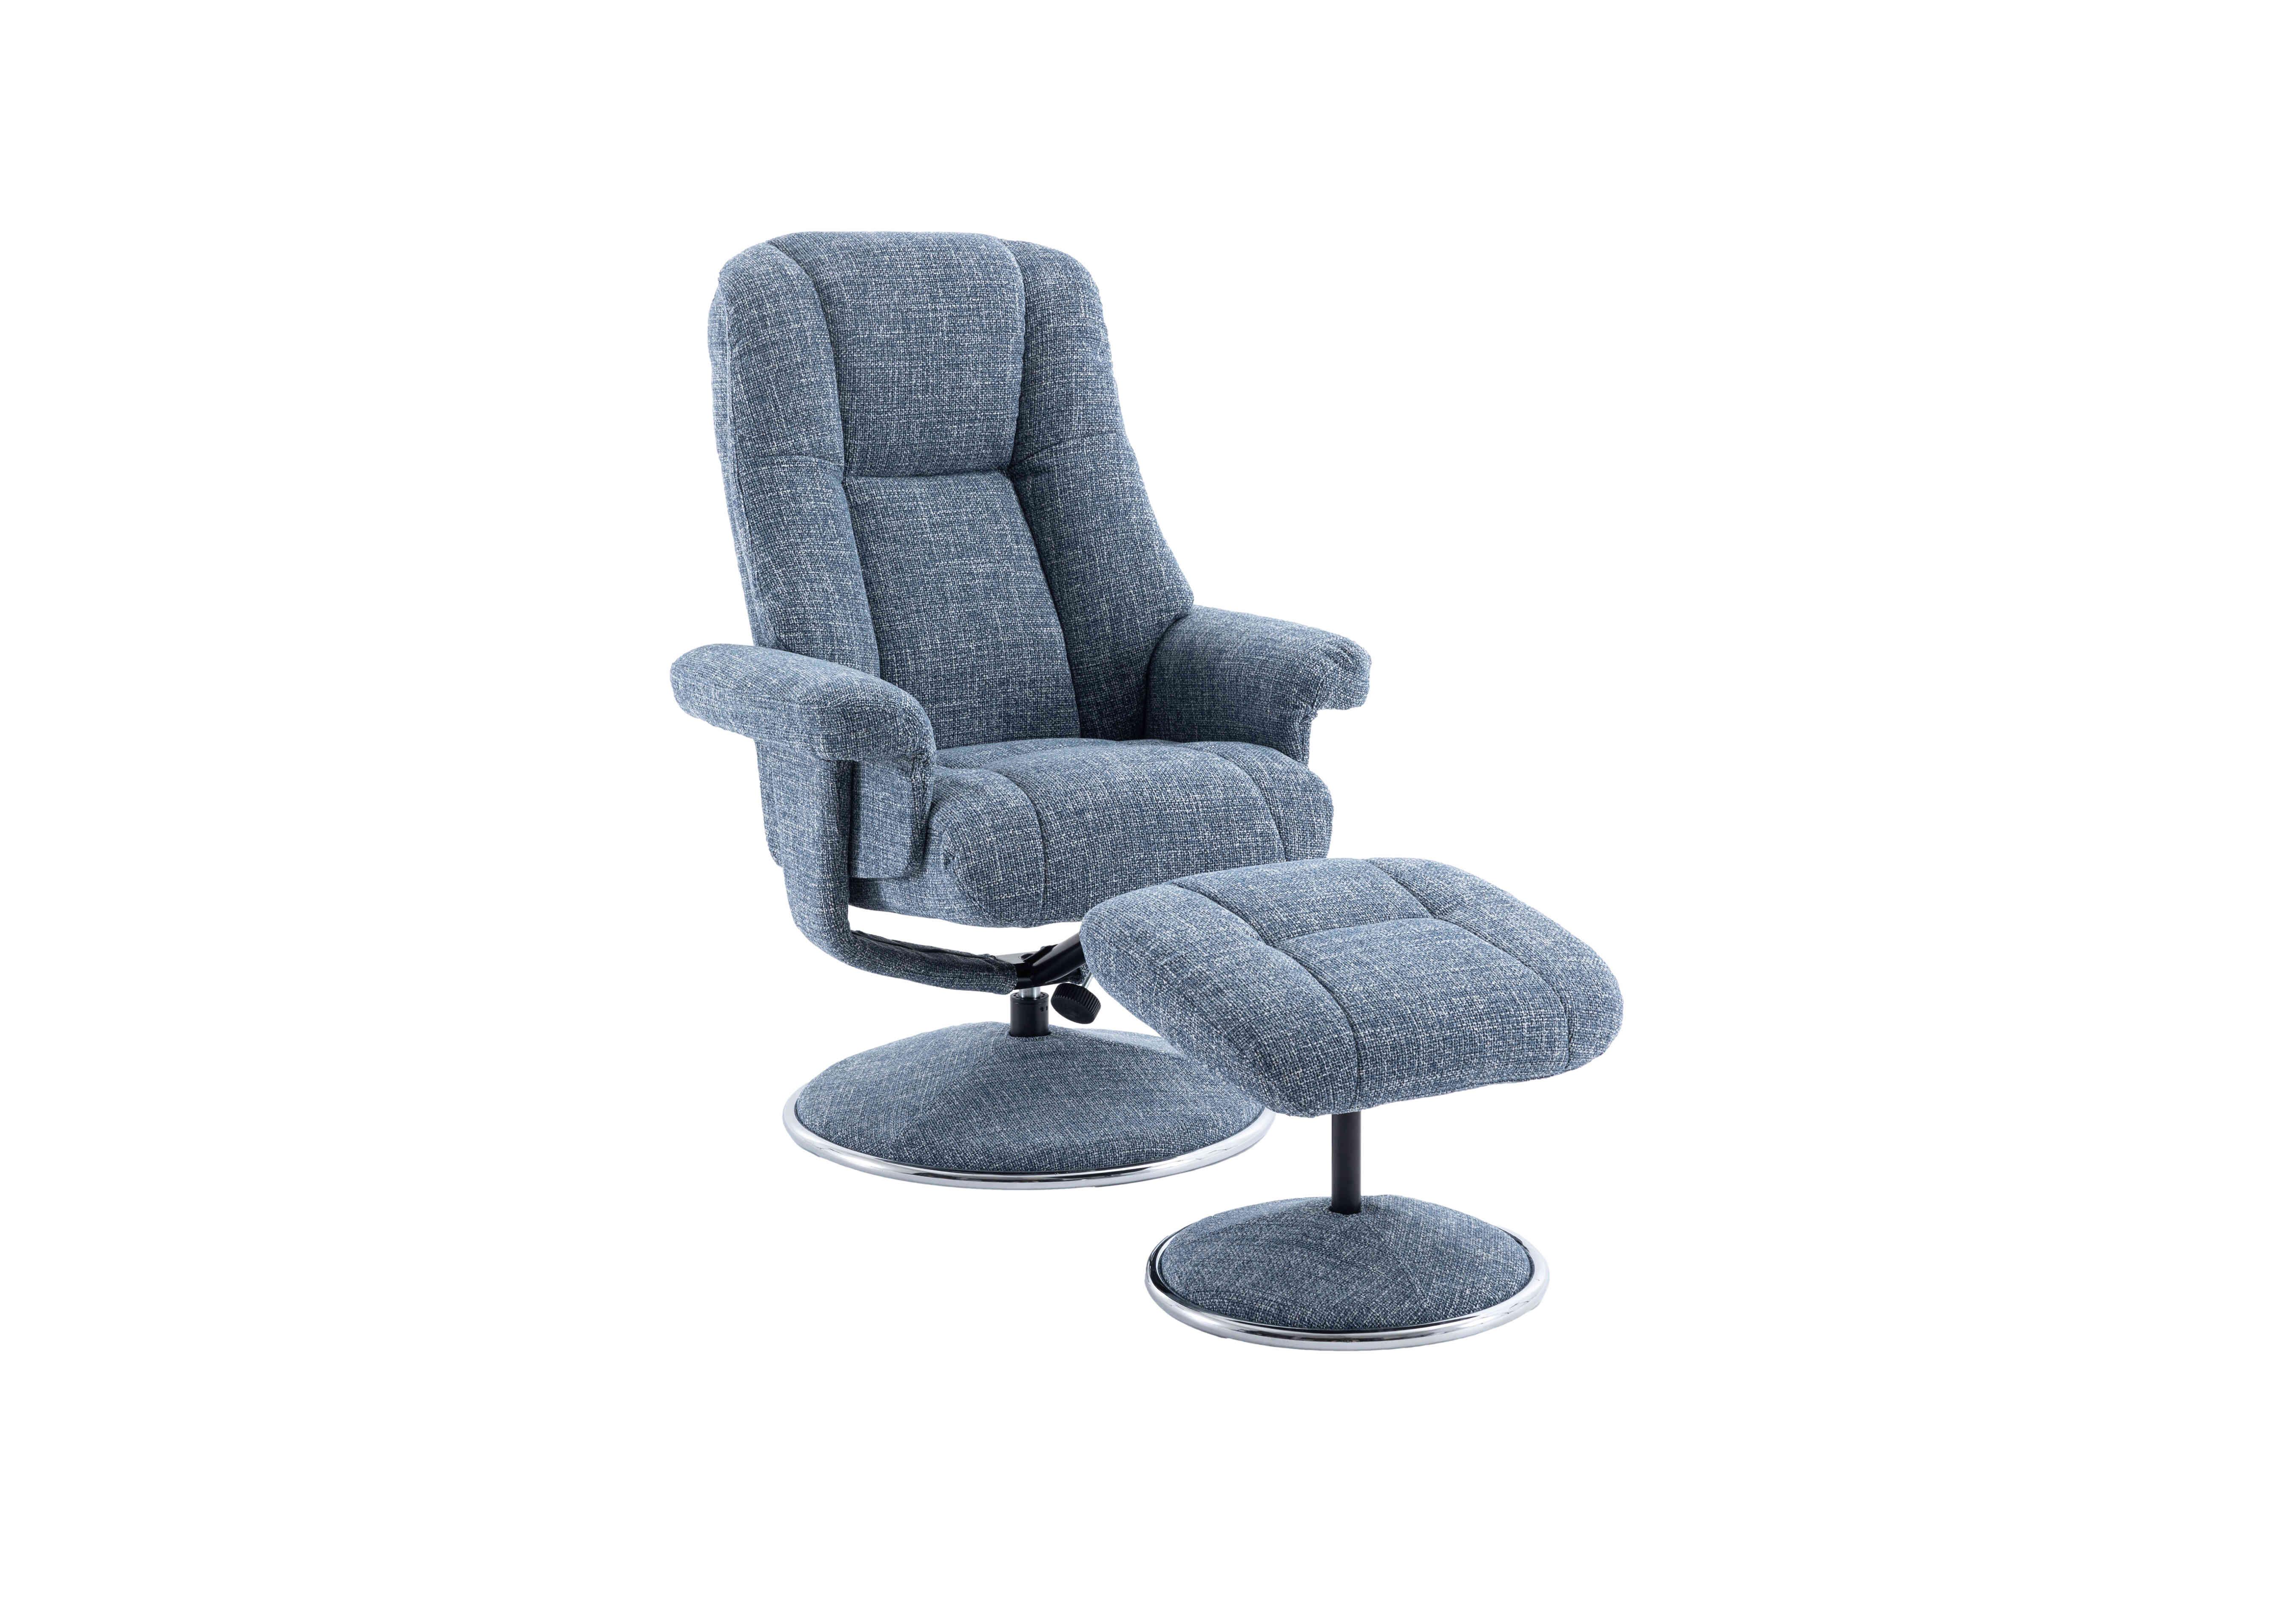 Troyes Fabric High-Back 360 Swivel Chair and Footstool in Chacha Ocean on Furniture Village